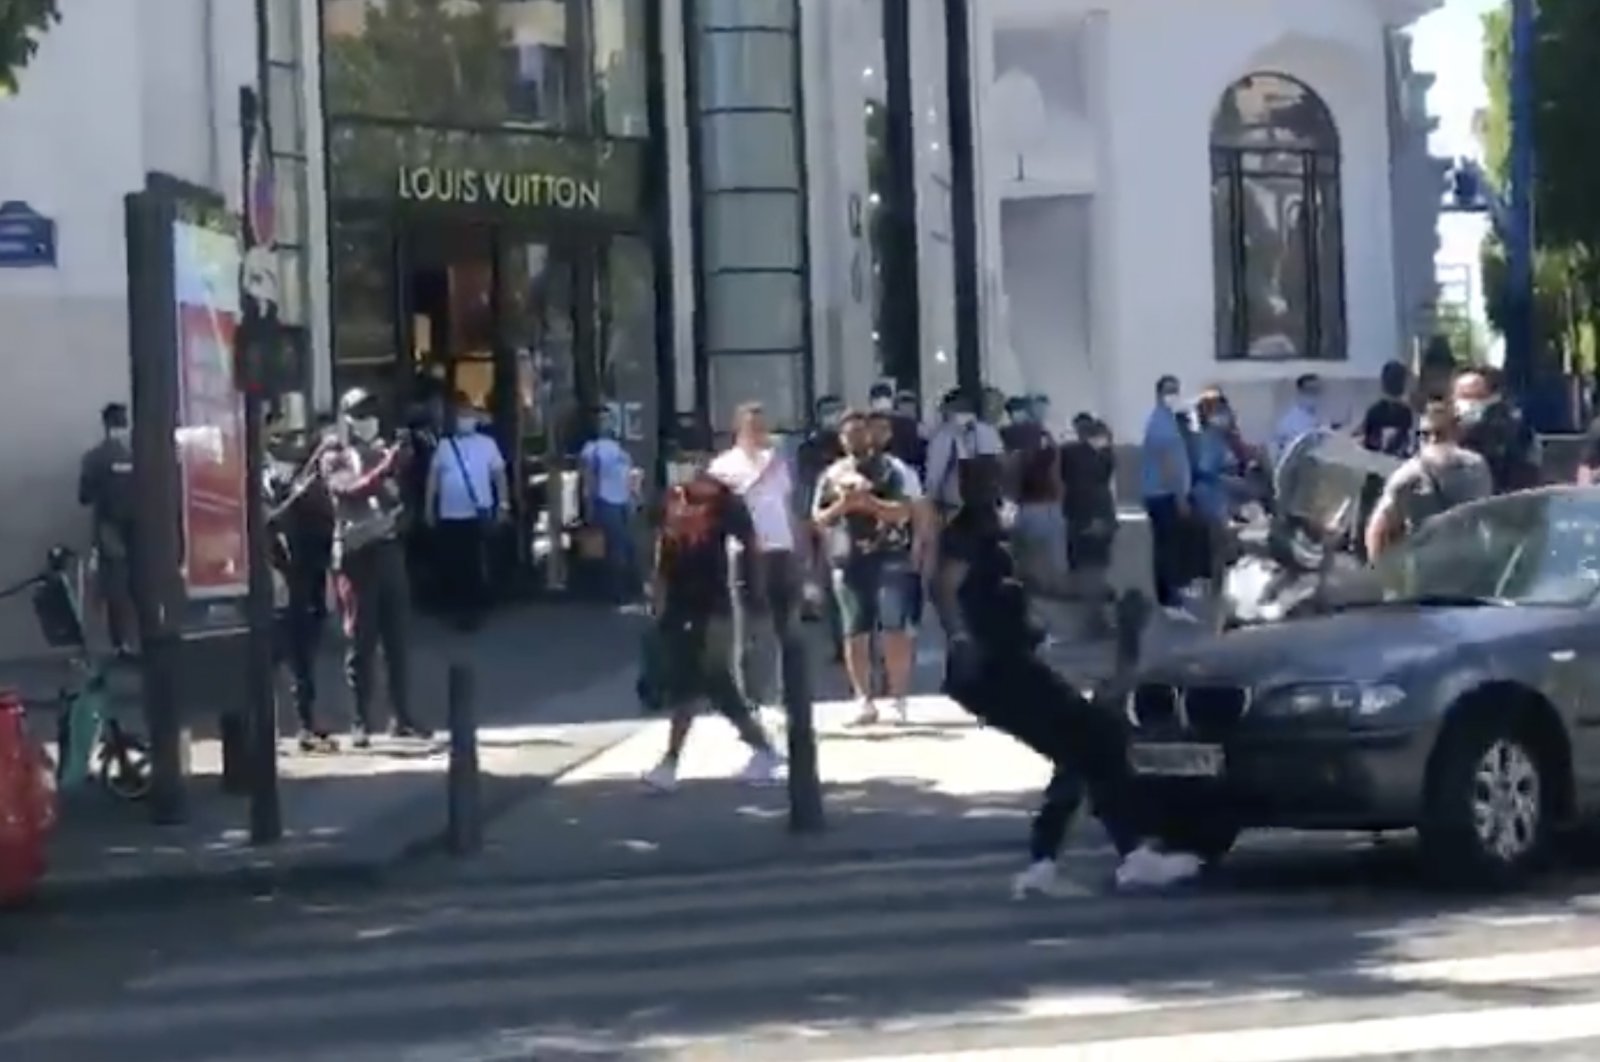 This screengrab shows the moment a black man is hit by a car amid protests in Paris, France, May 31, 2021.